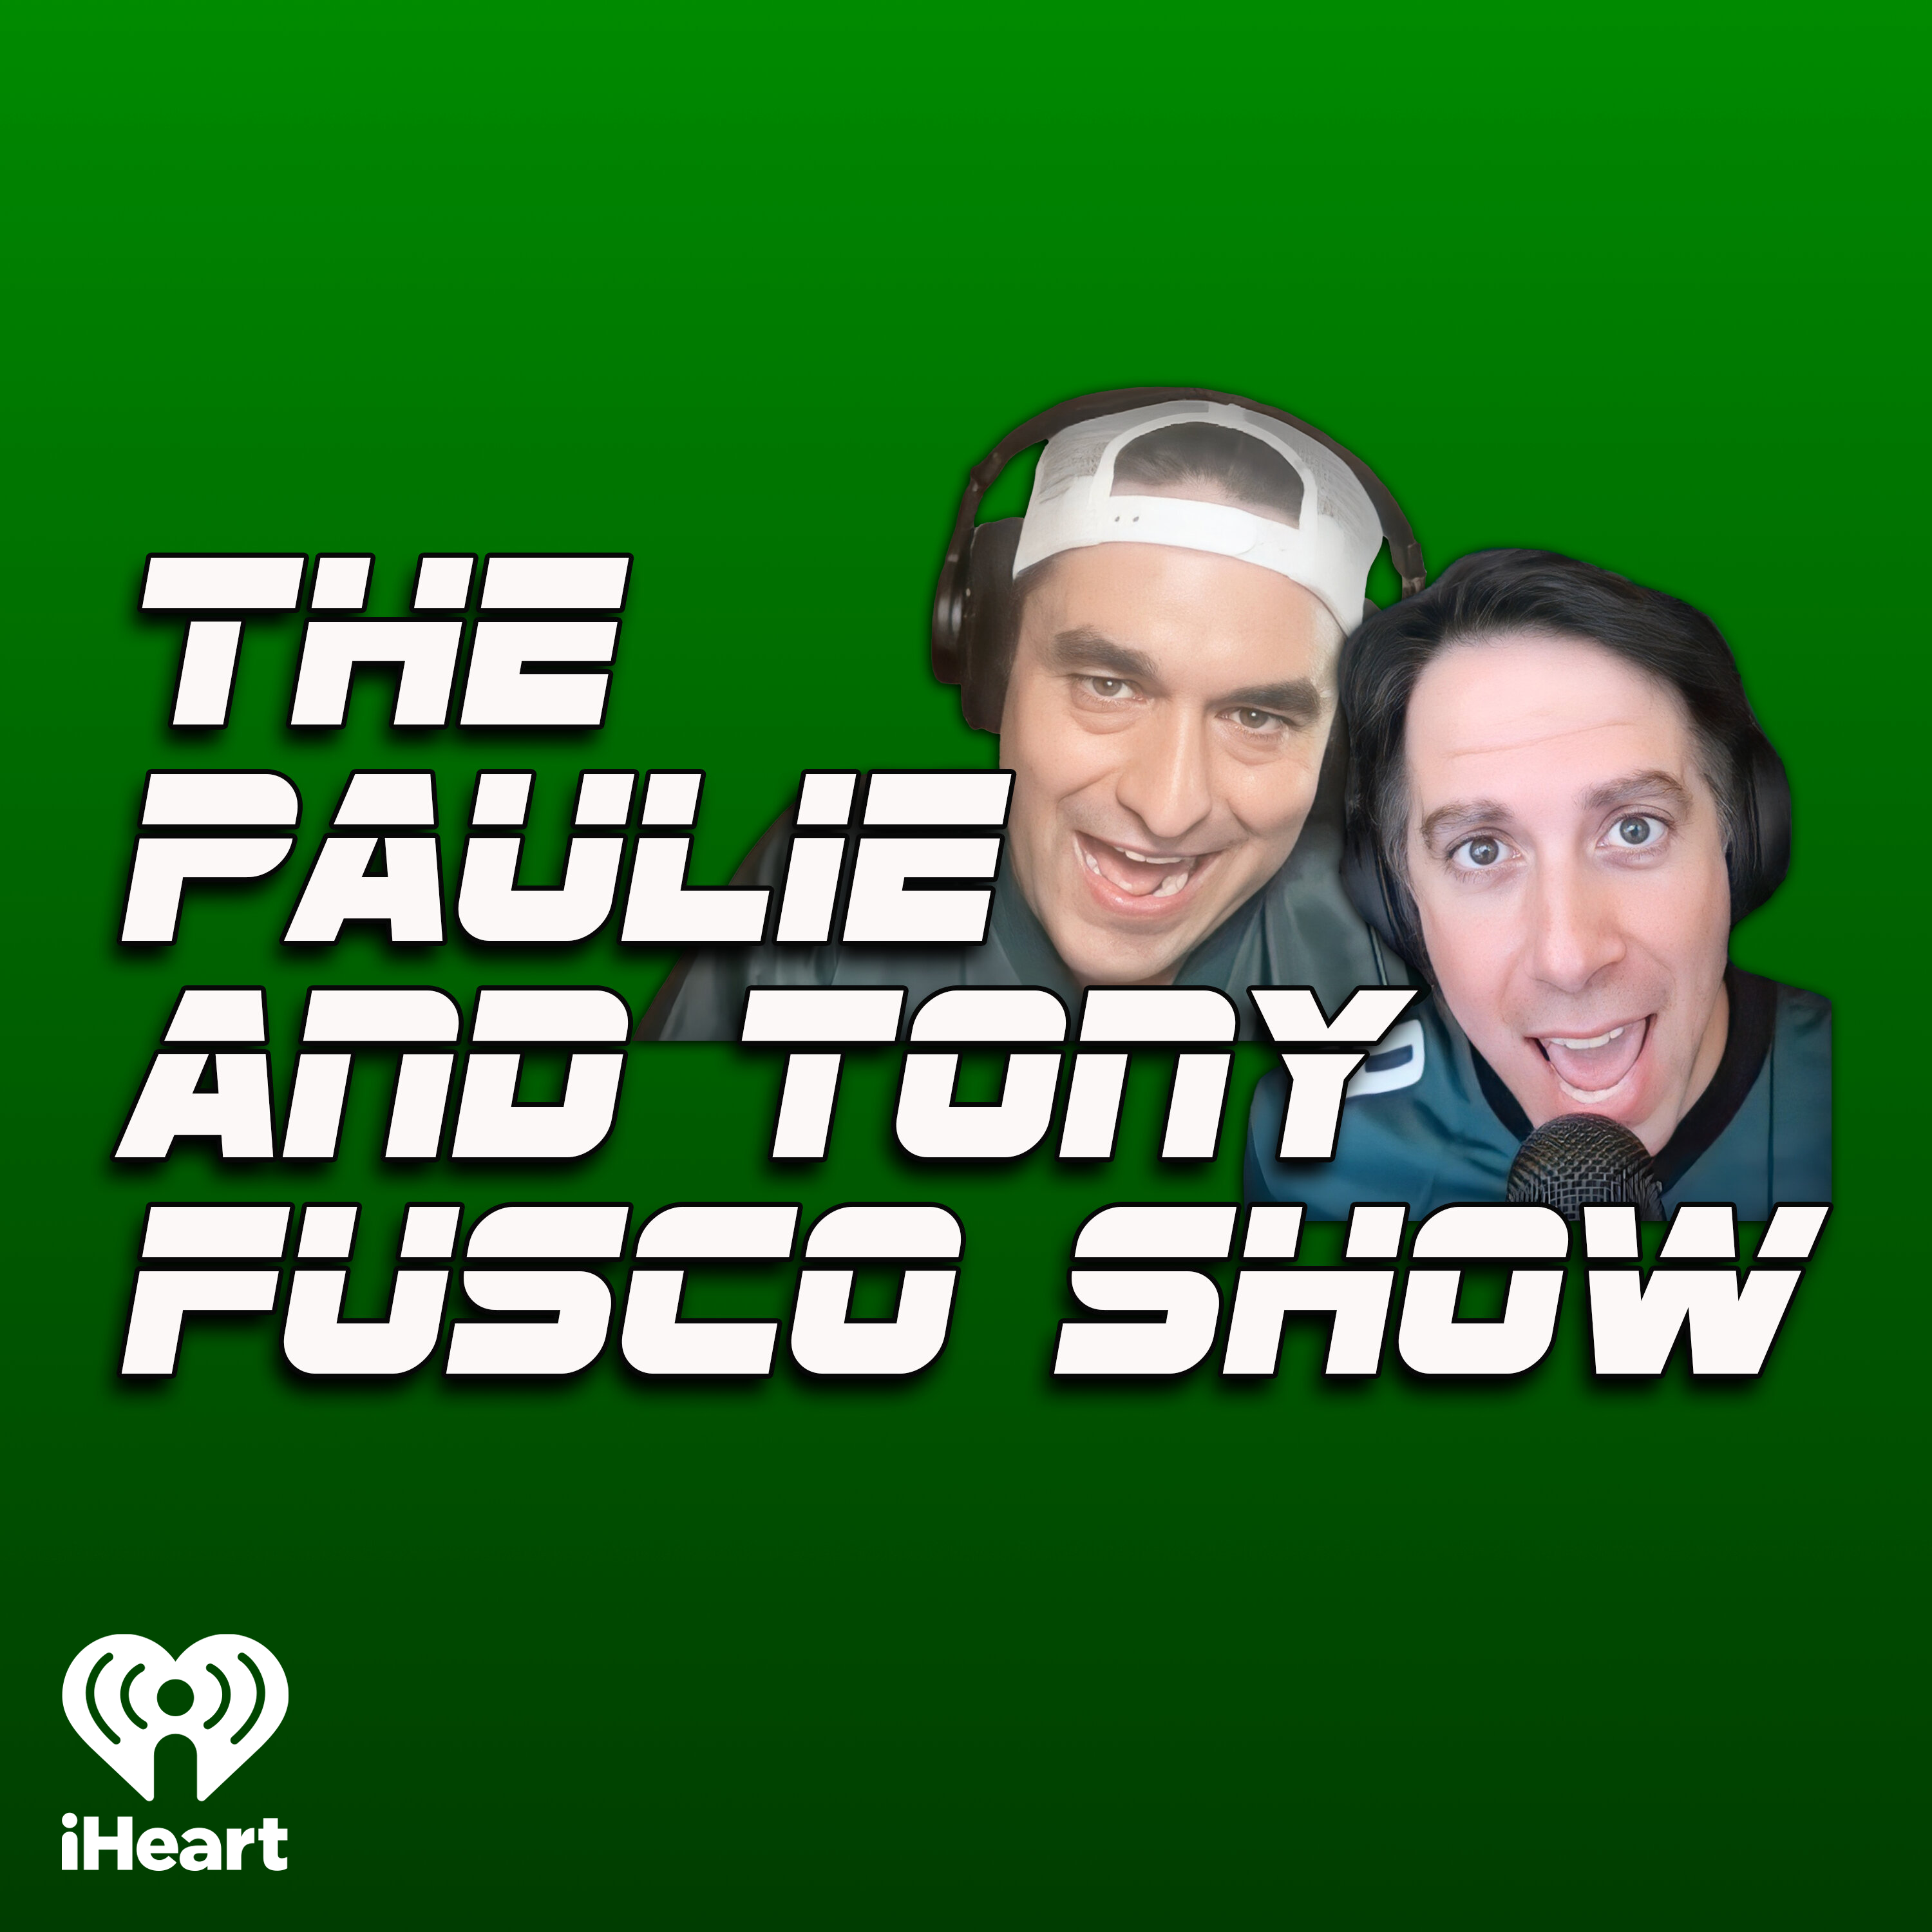 The Paulie & Tony Fusco Show: We found Dak's next team + why NIT is MUCH BETTER than NCAA tourney